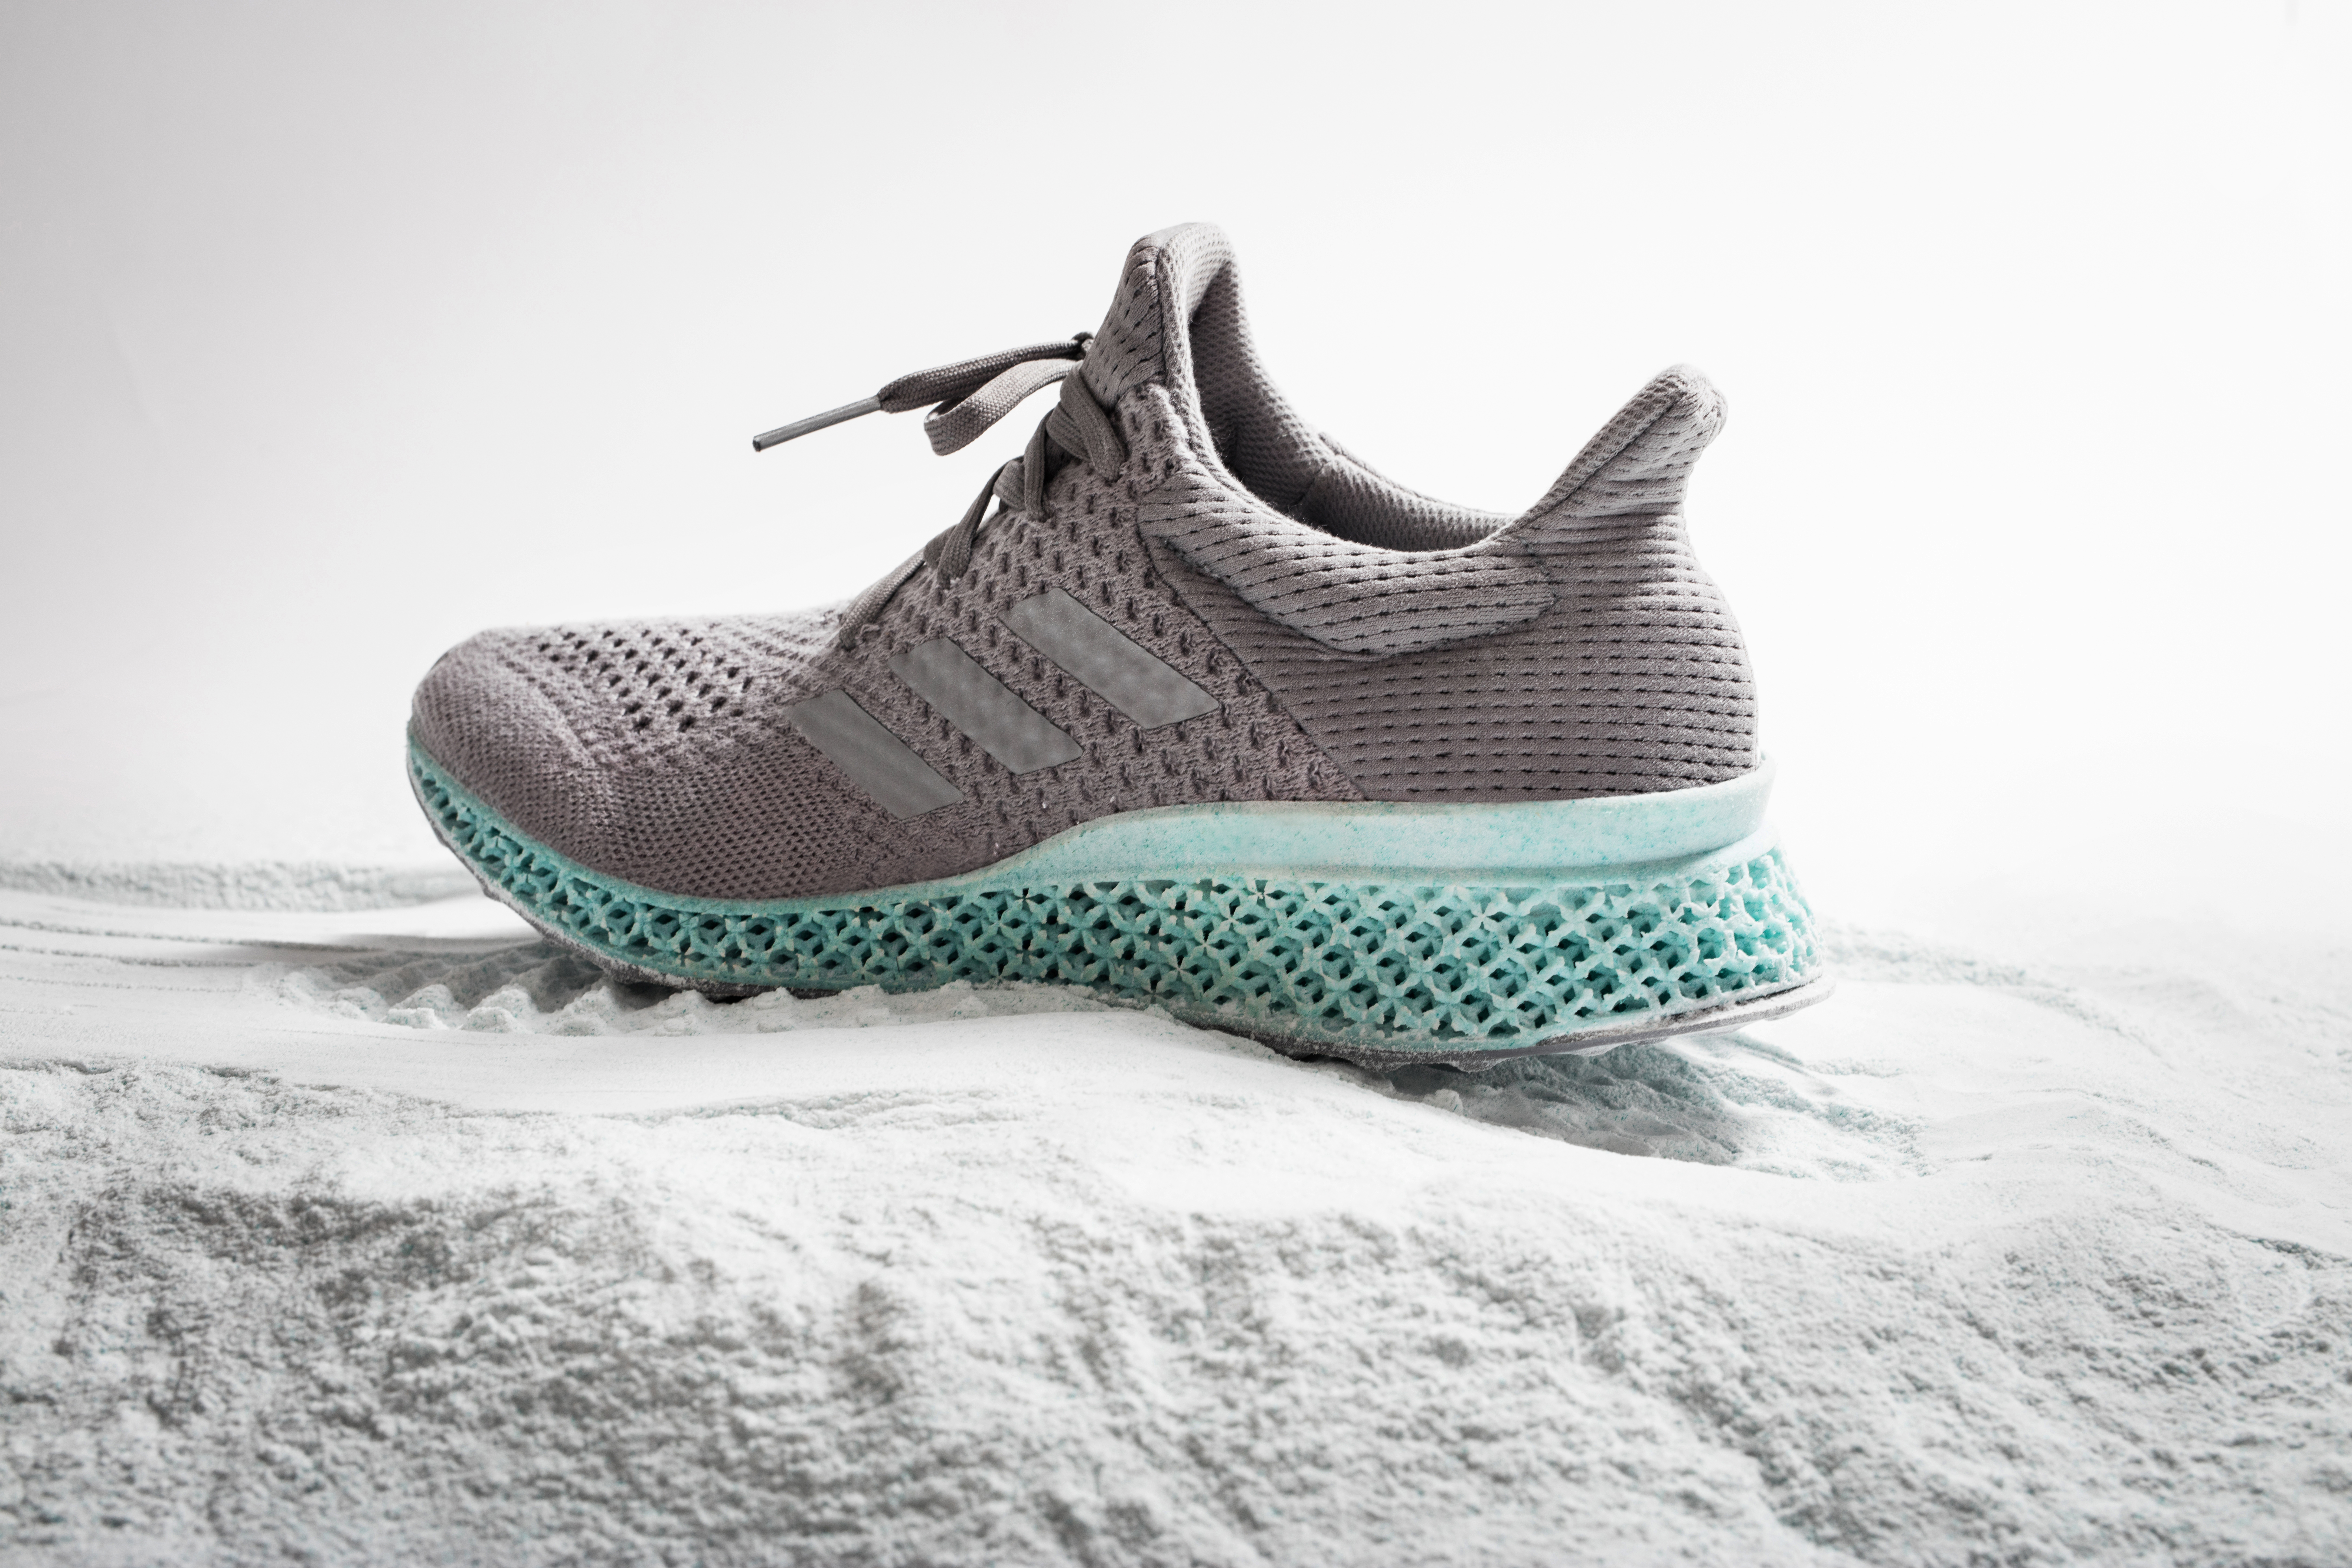 Adidas Makes Eco-Friendly Shoes Out of 